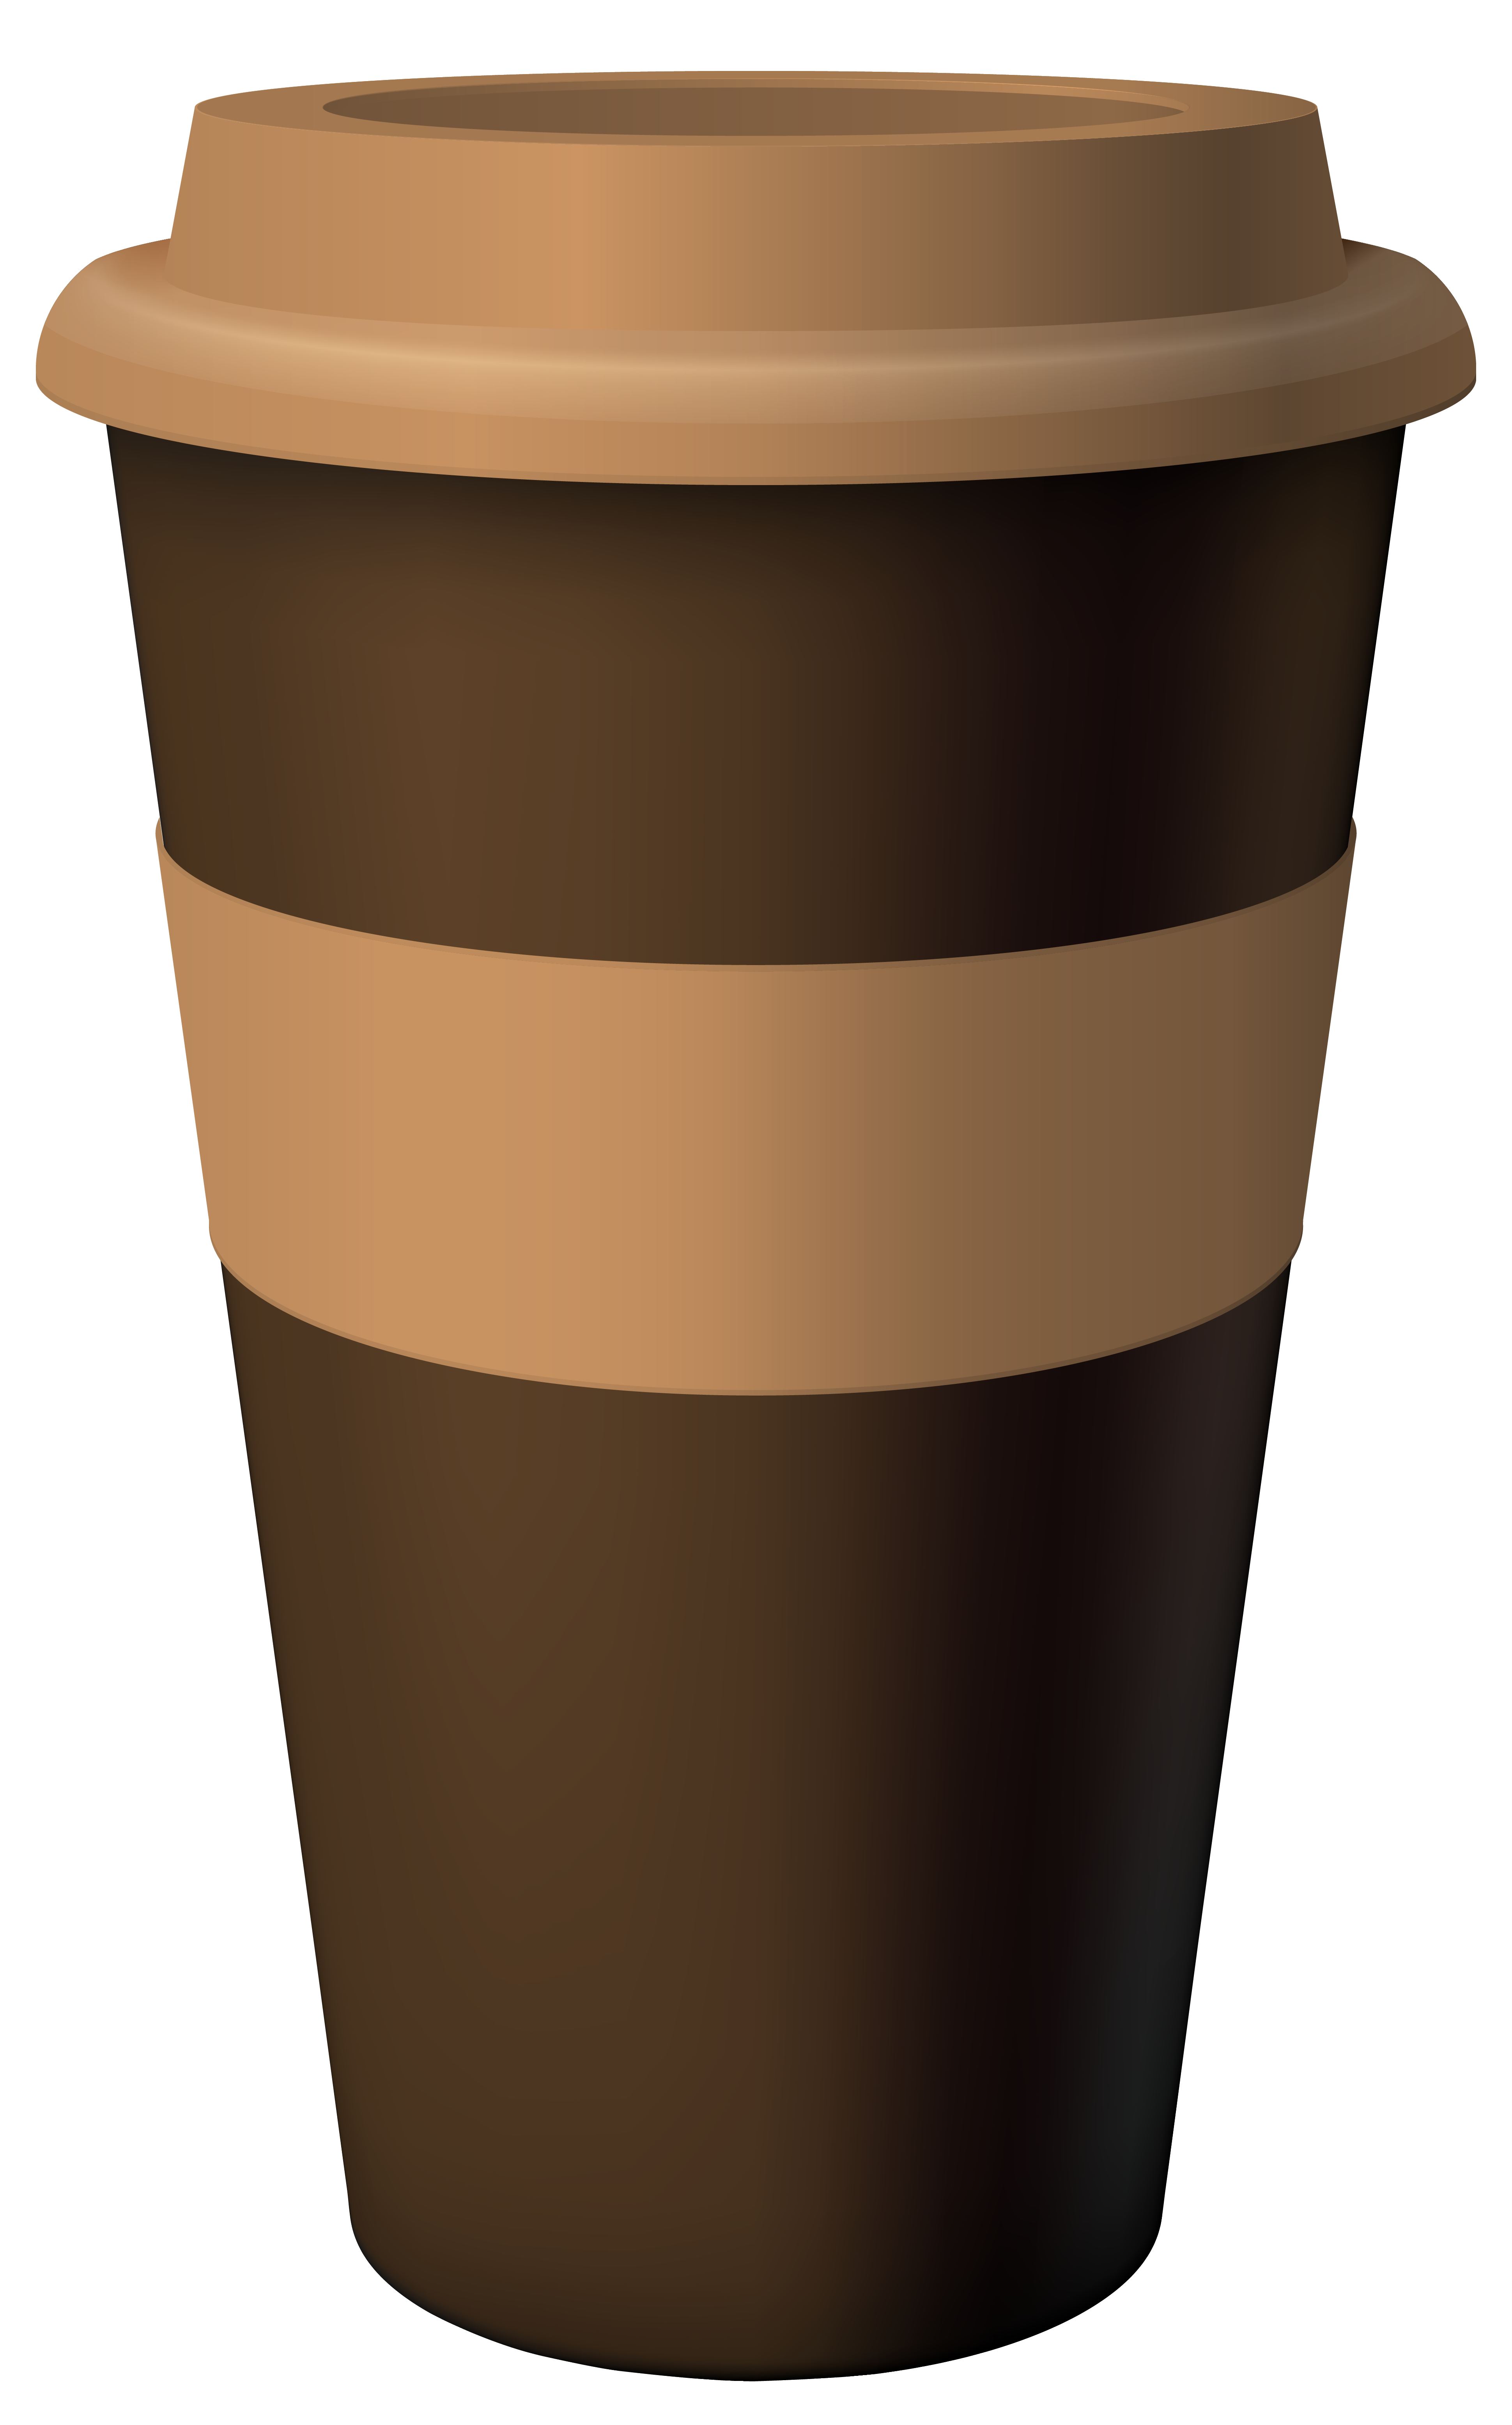 Cup clipart takeaway coffee, Cup takeaway coffee Transparent